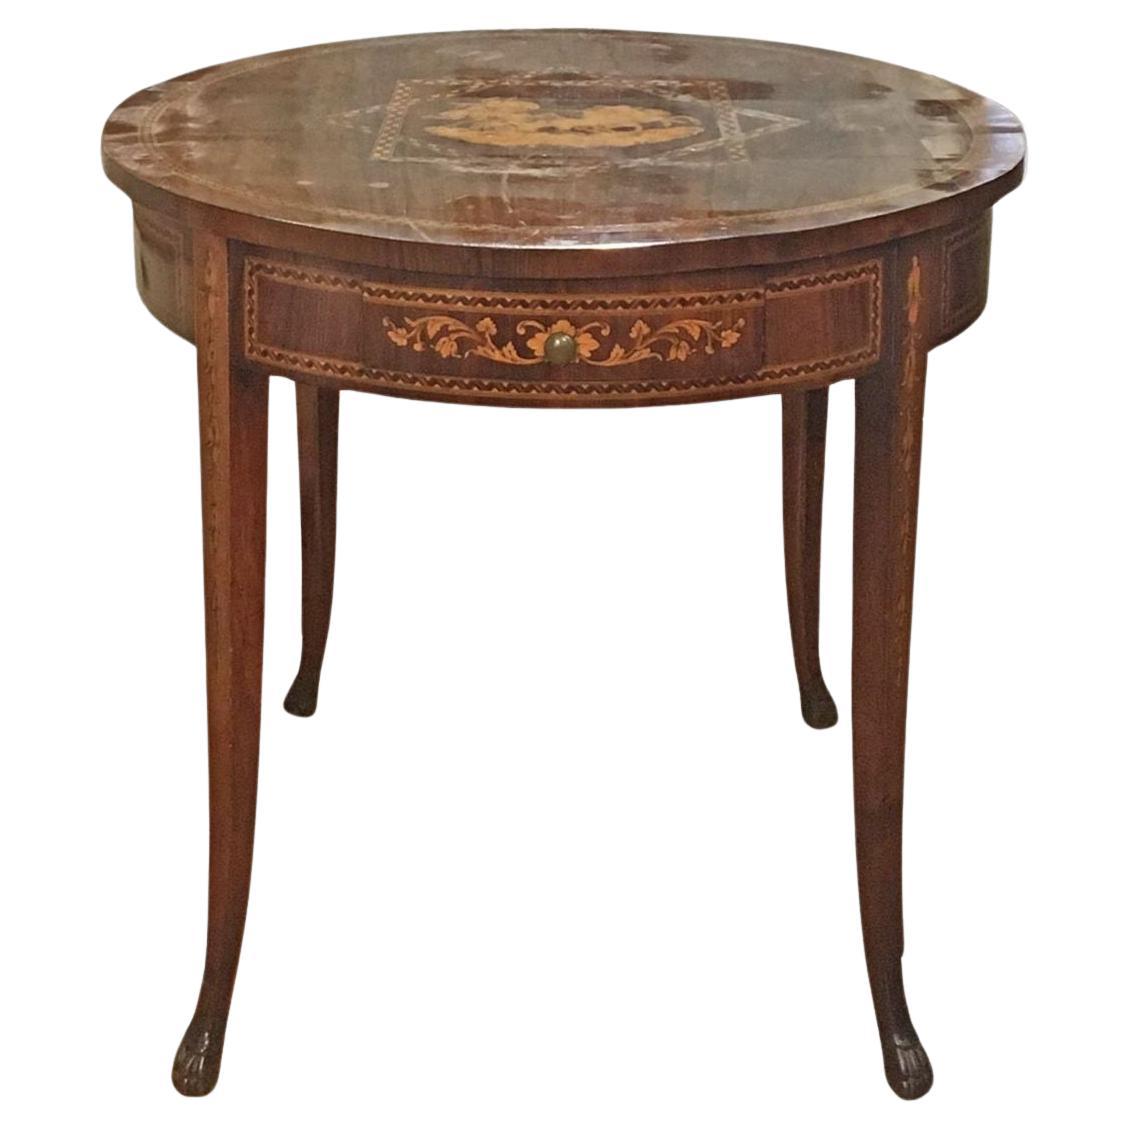 EARLY 19th CENTURY TUSCAN DIRECTORIO TABLE IN WALNUT AND FRUIT WOOD